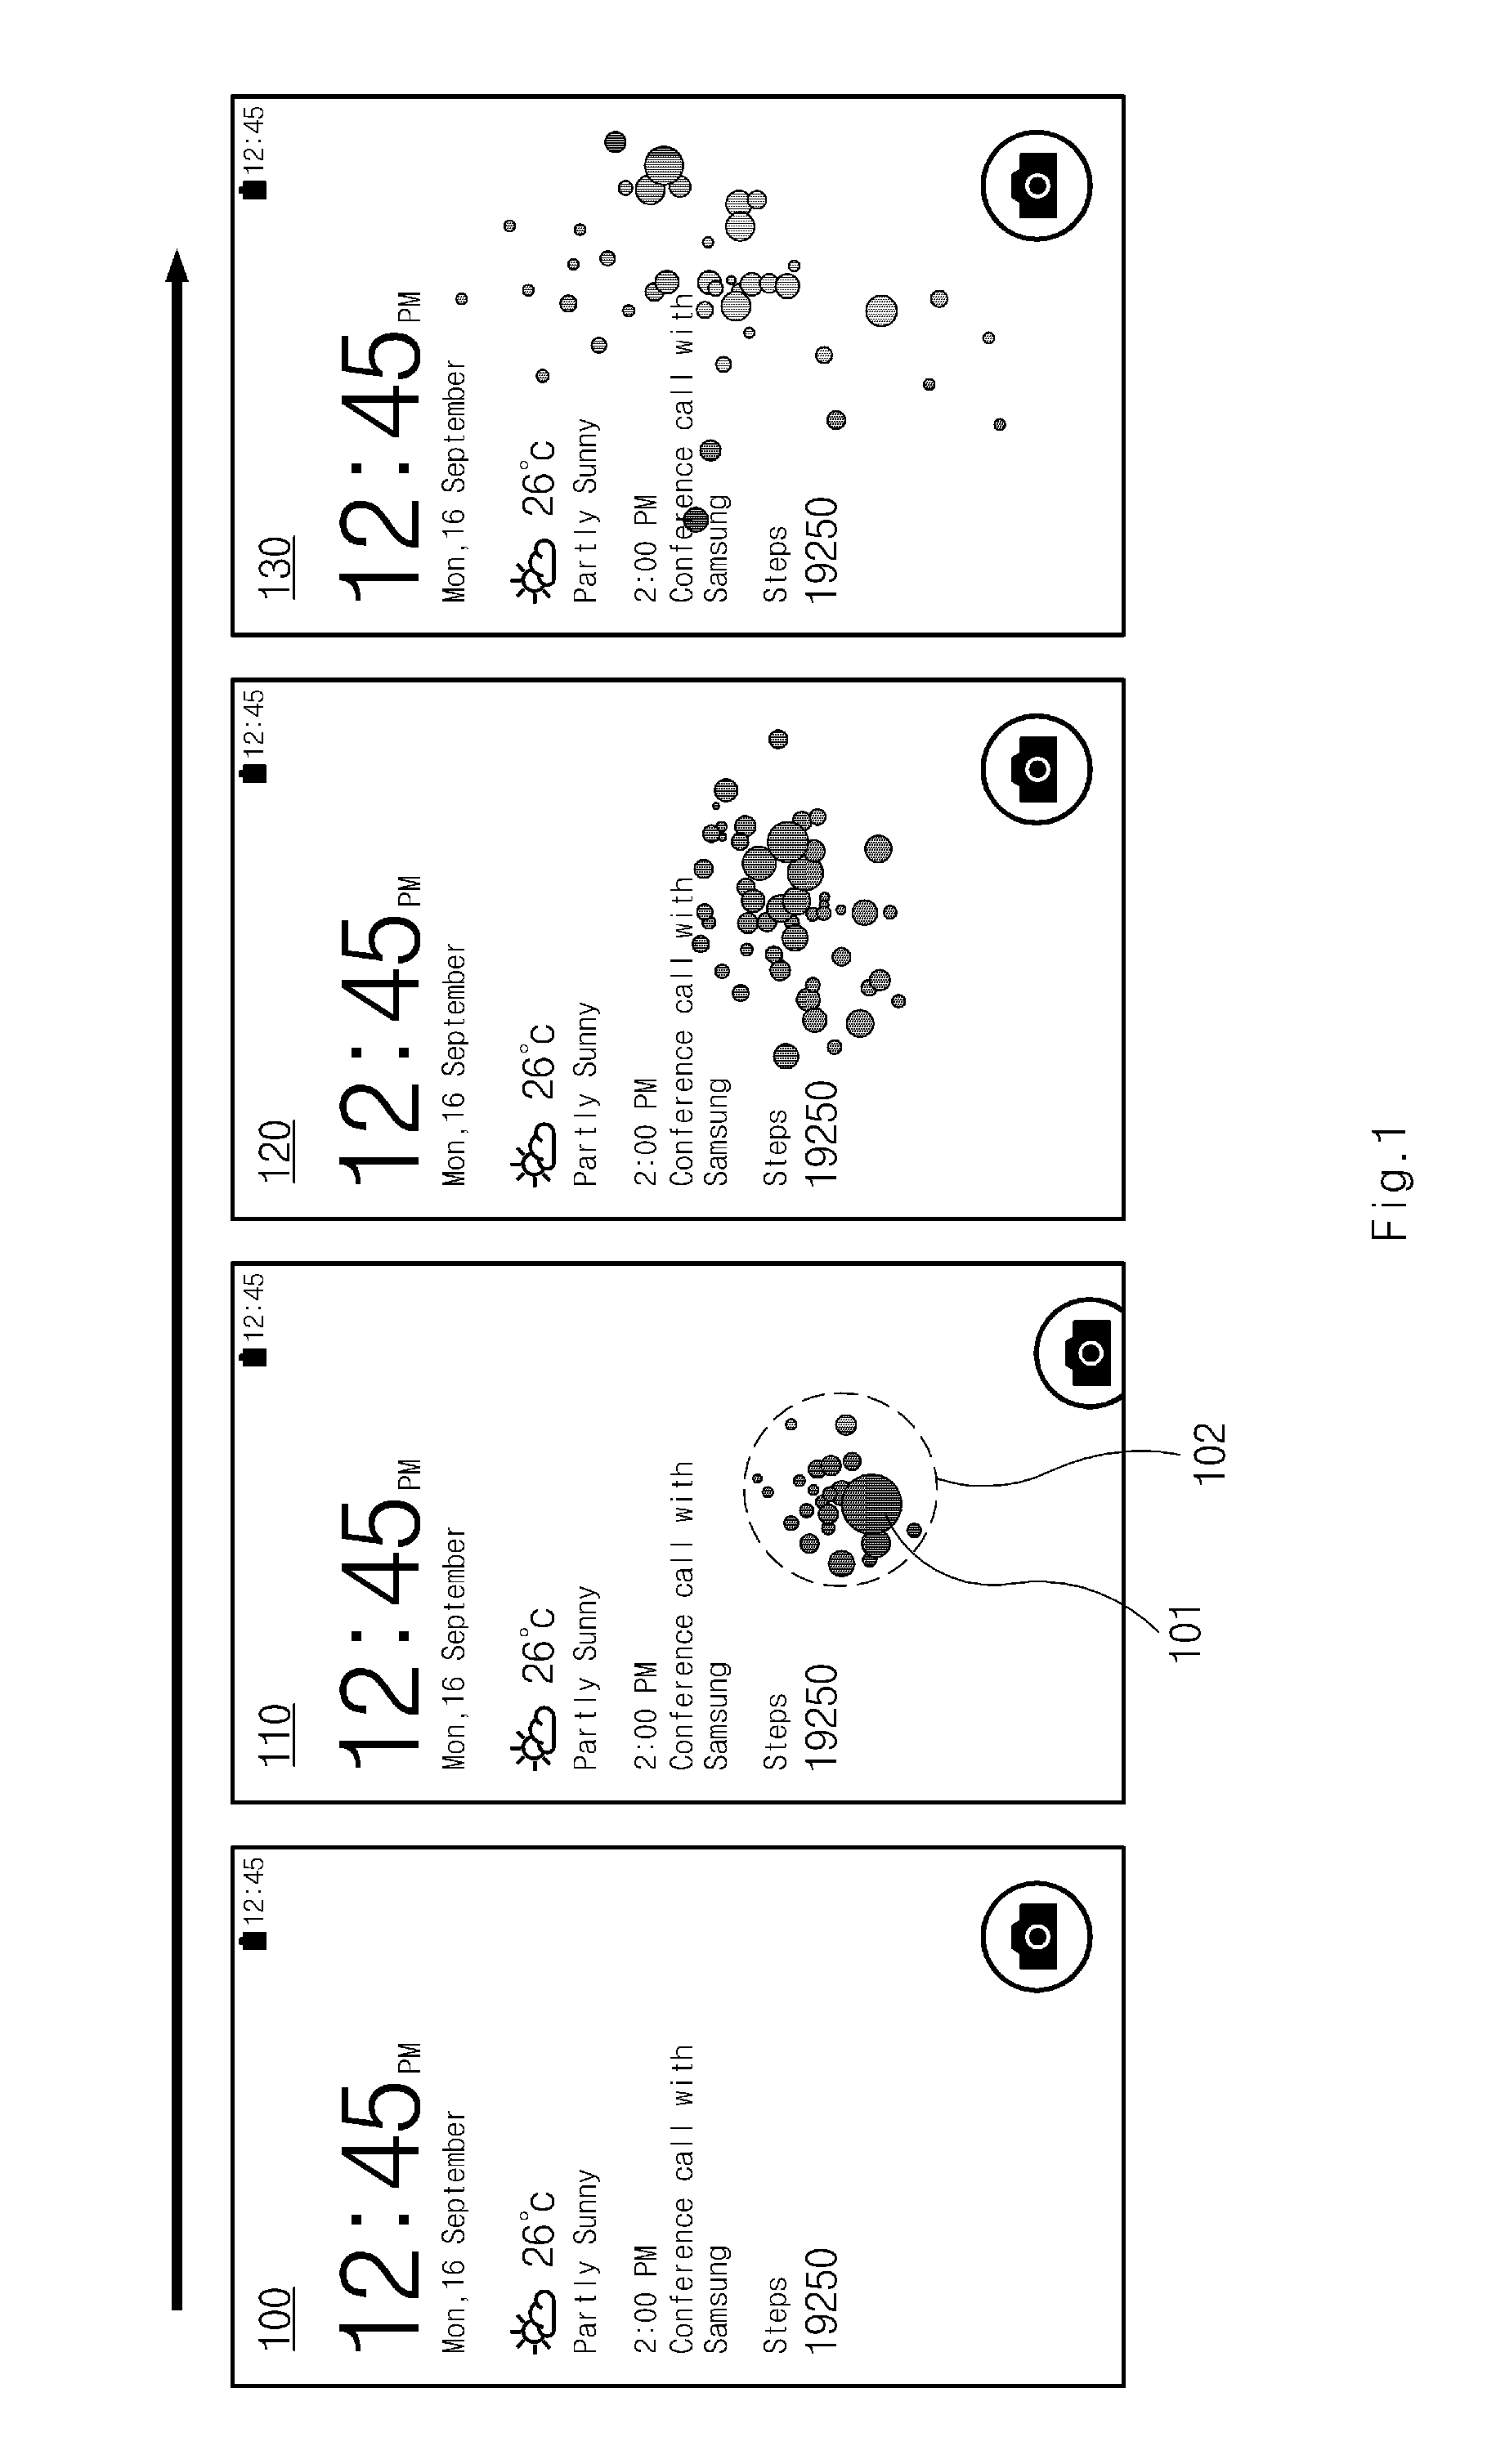 Displaying particle effect on screen of electronic device